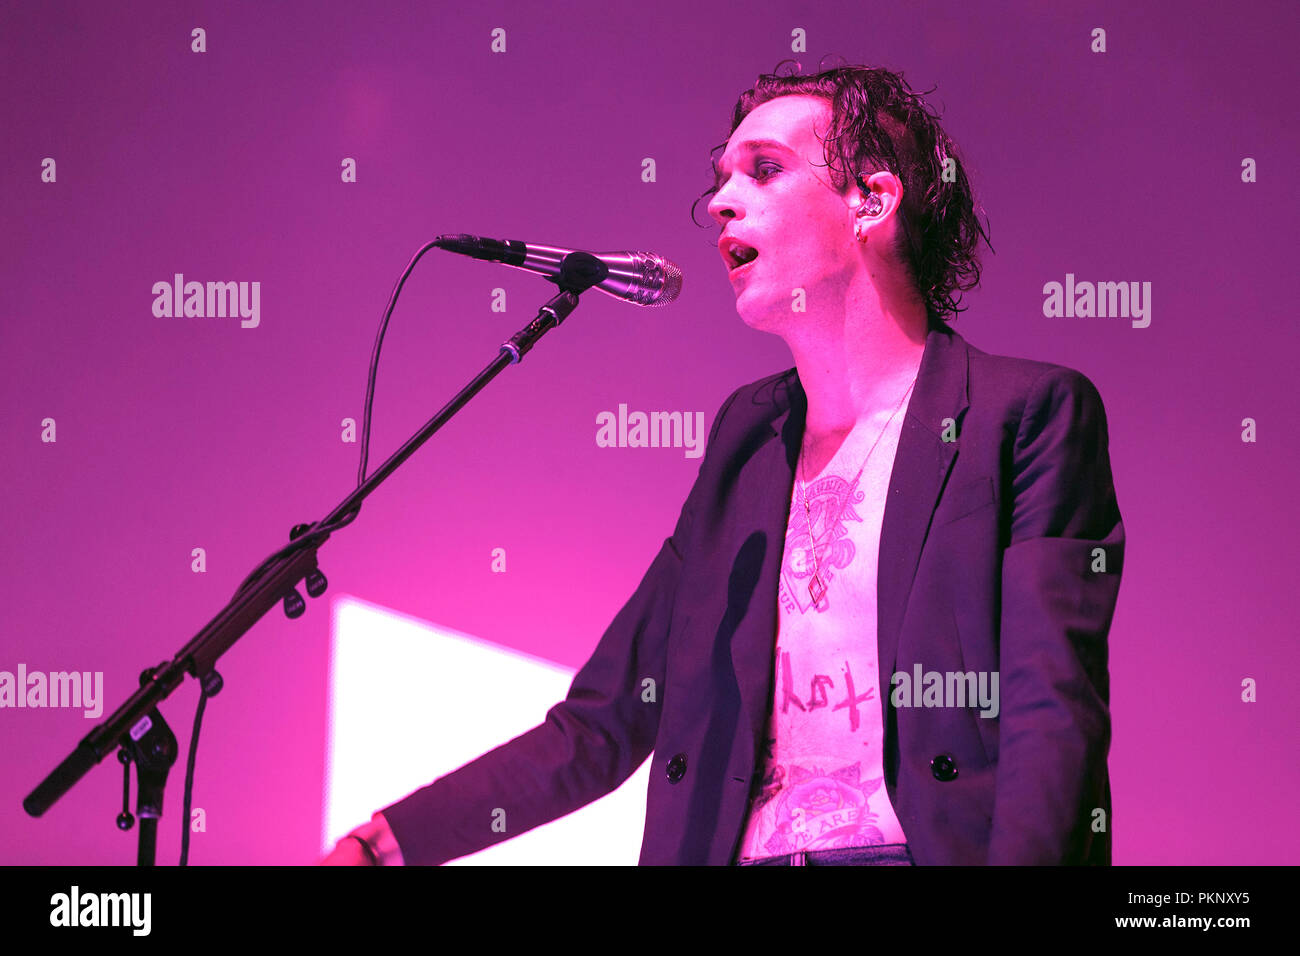 Matthew Healy, lead singer of The 1975, onstage during a major festival performance in 2017. Matty Healy, Matt Healy, The 1975 singer. Stock Photo